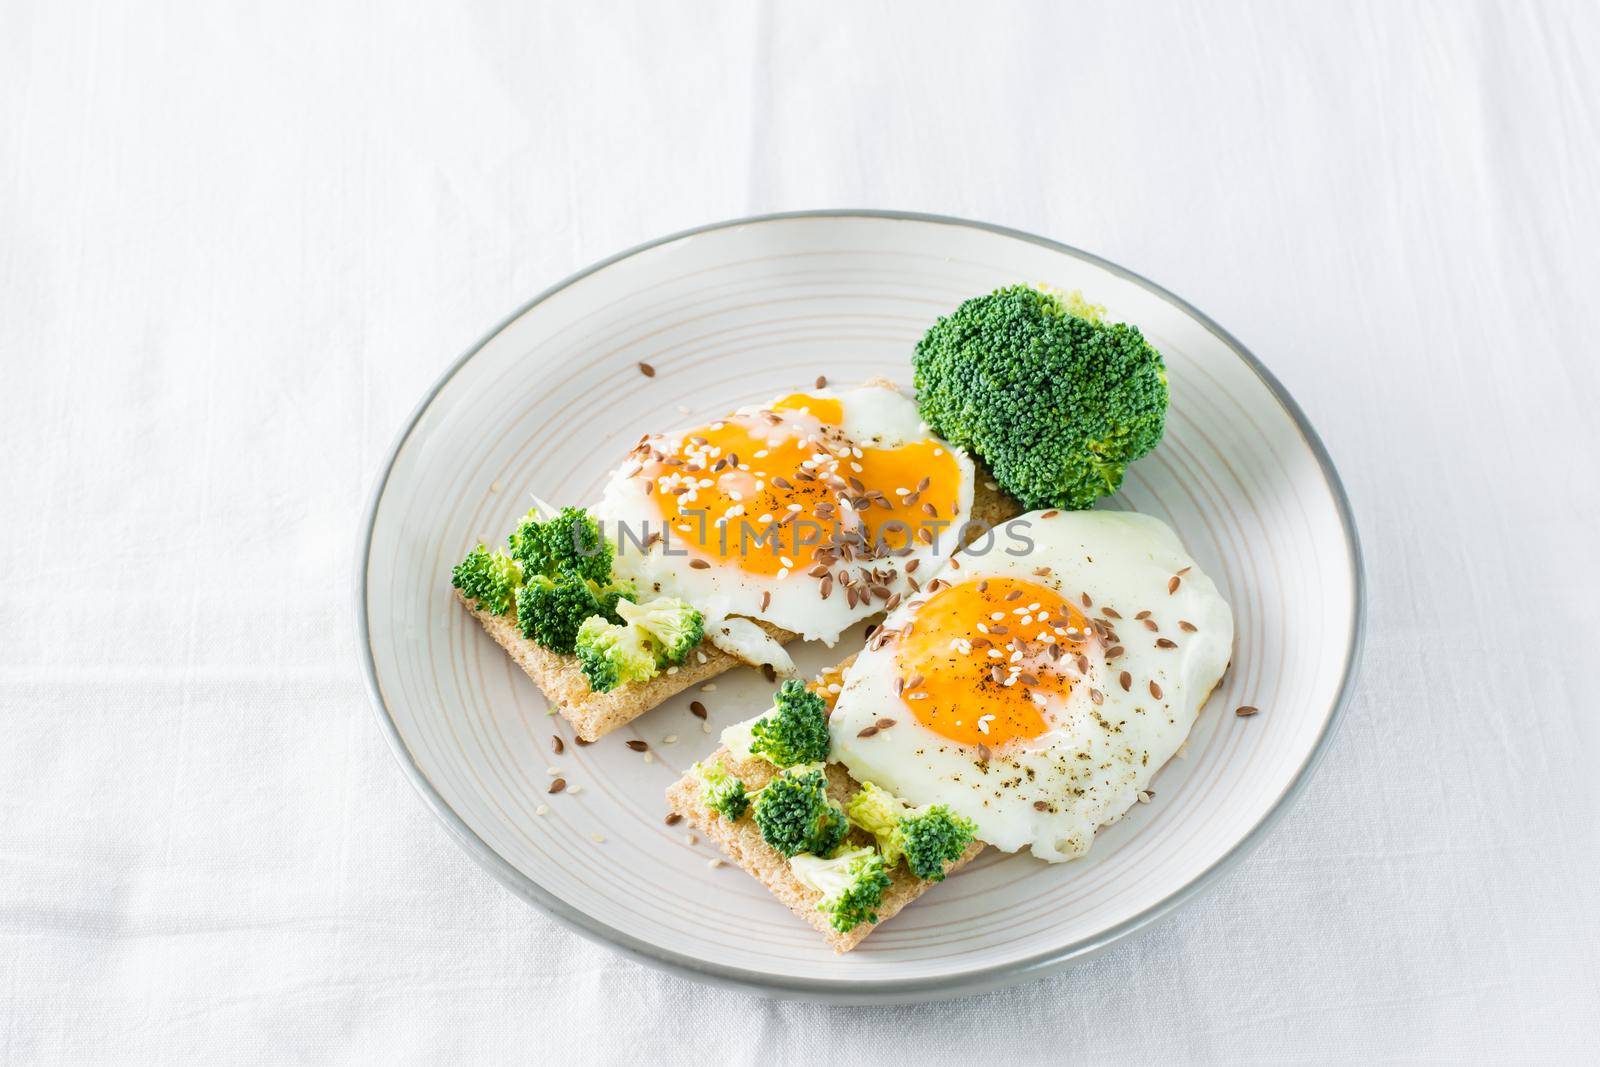 Bruschetta with scrambled eggs and broccoli on a grain crispbread on a plate on the table by Aleruana